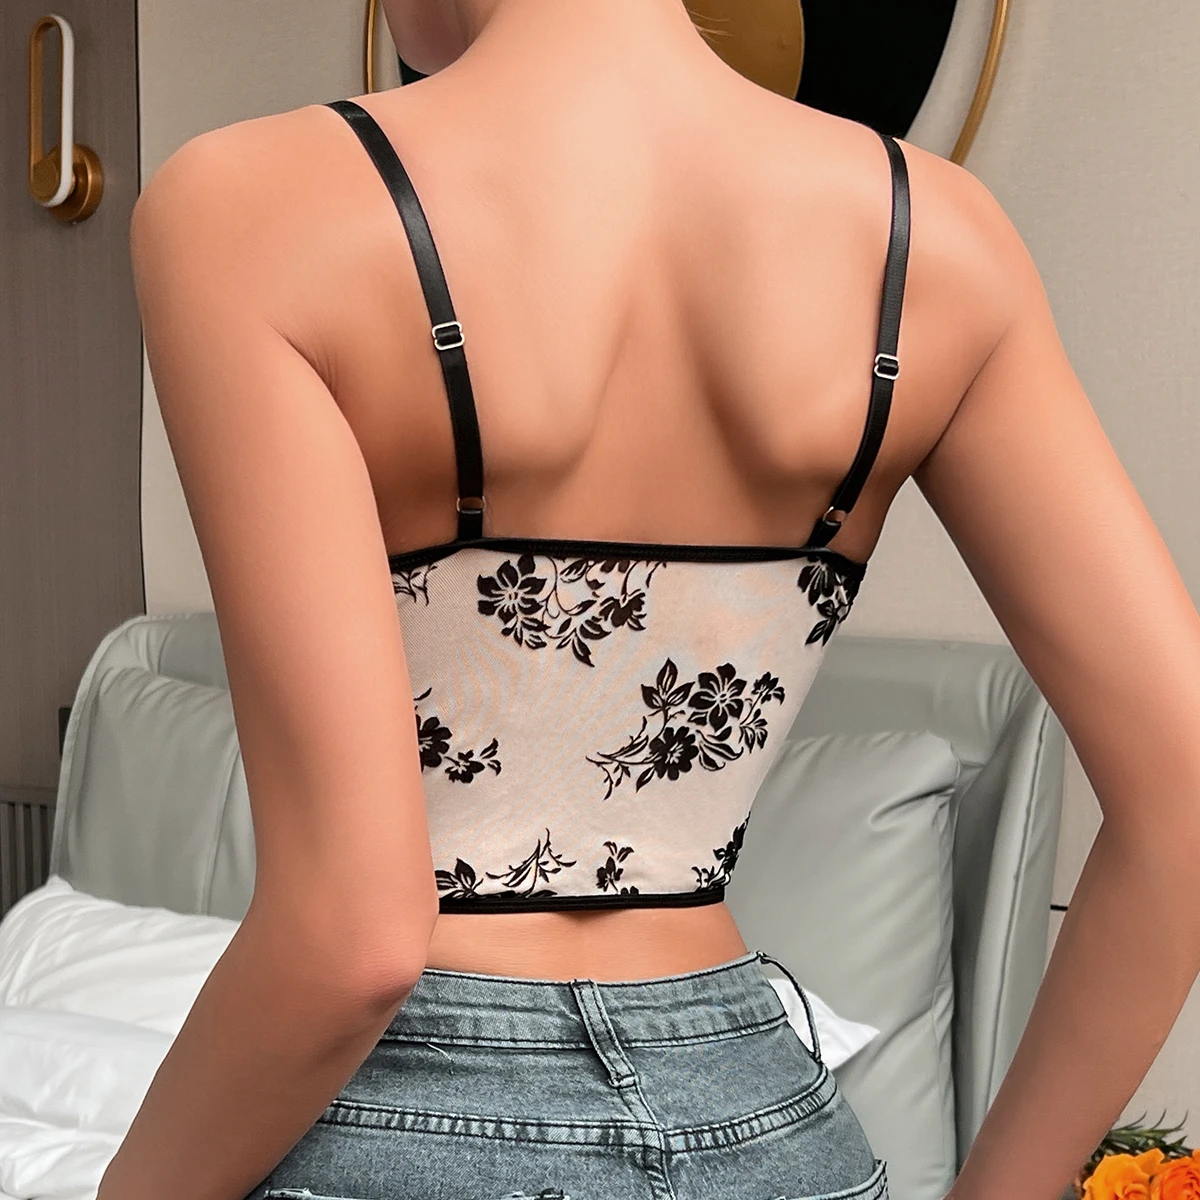 Vemina Hollowing Mesh See Through Embroidery Slim Crop Top, Spaghetti Strap Sexy Strappy Tank Vest,Lace Halter Camisole Corset